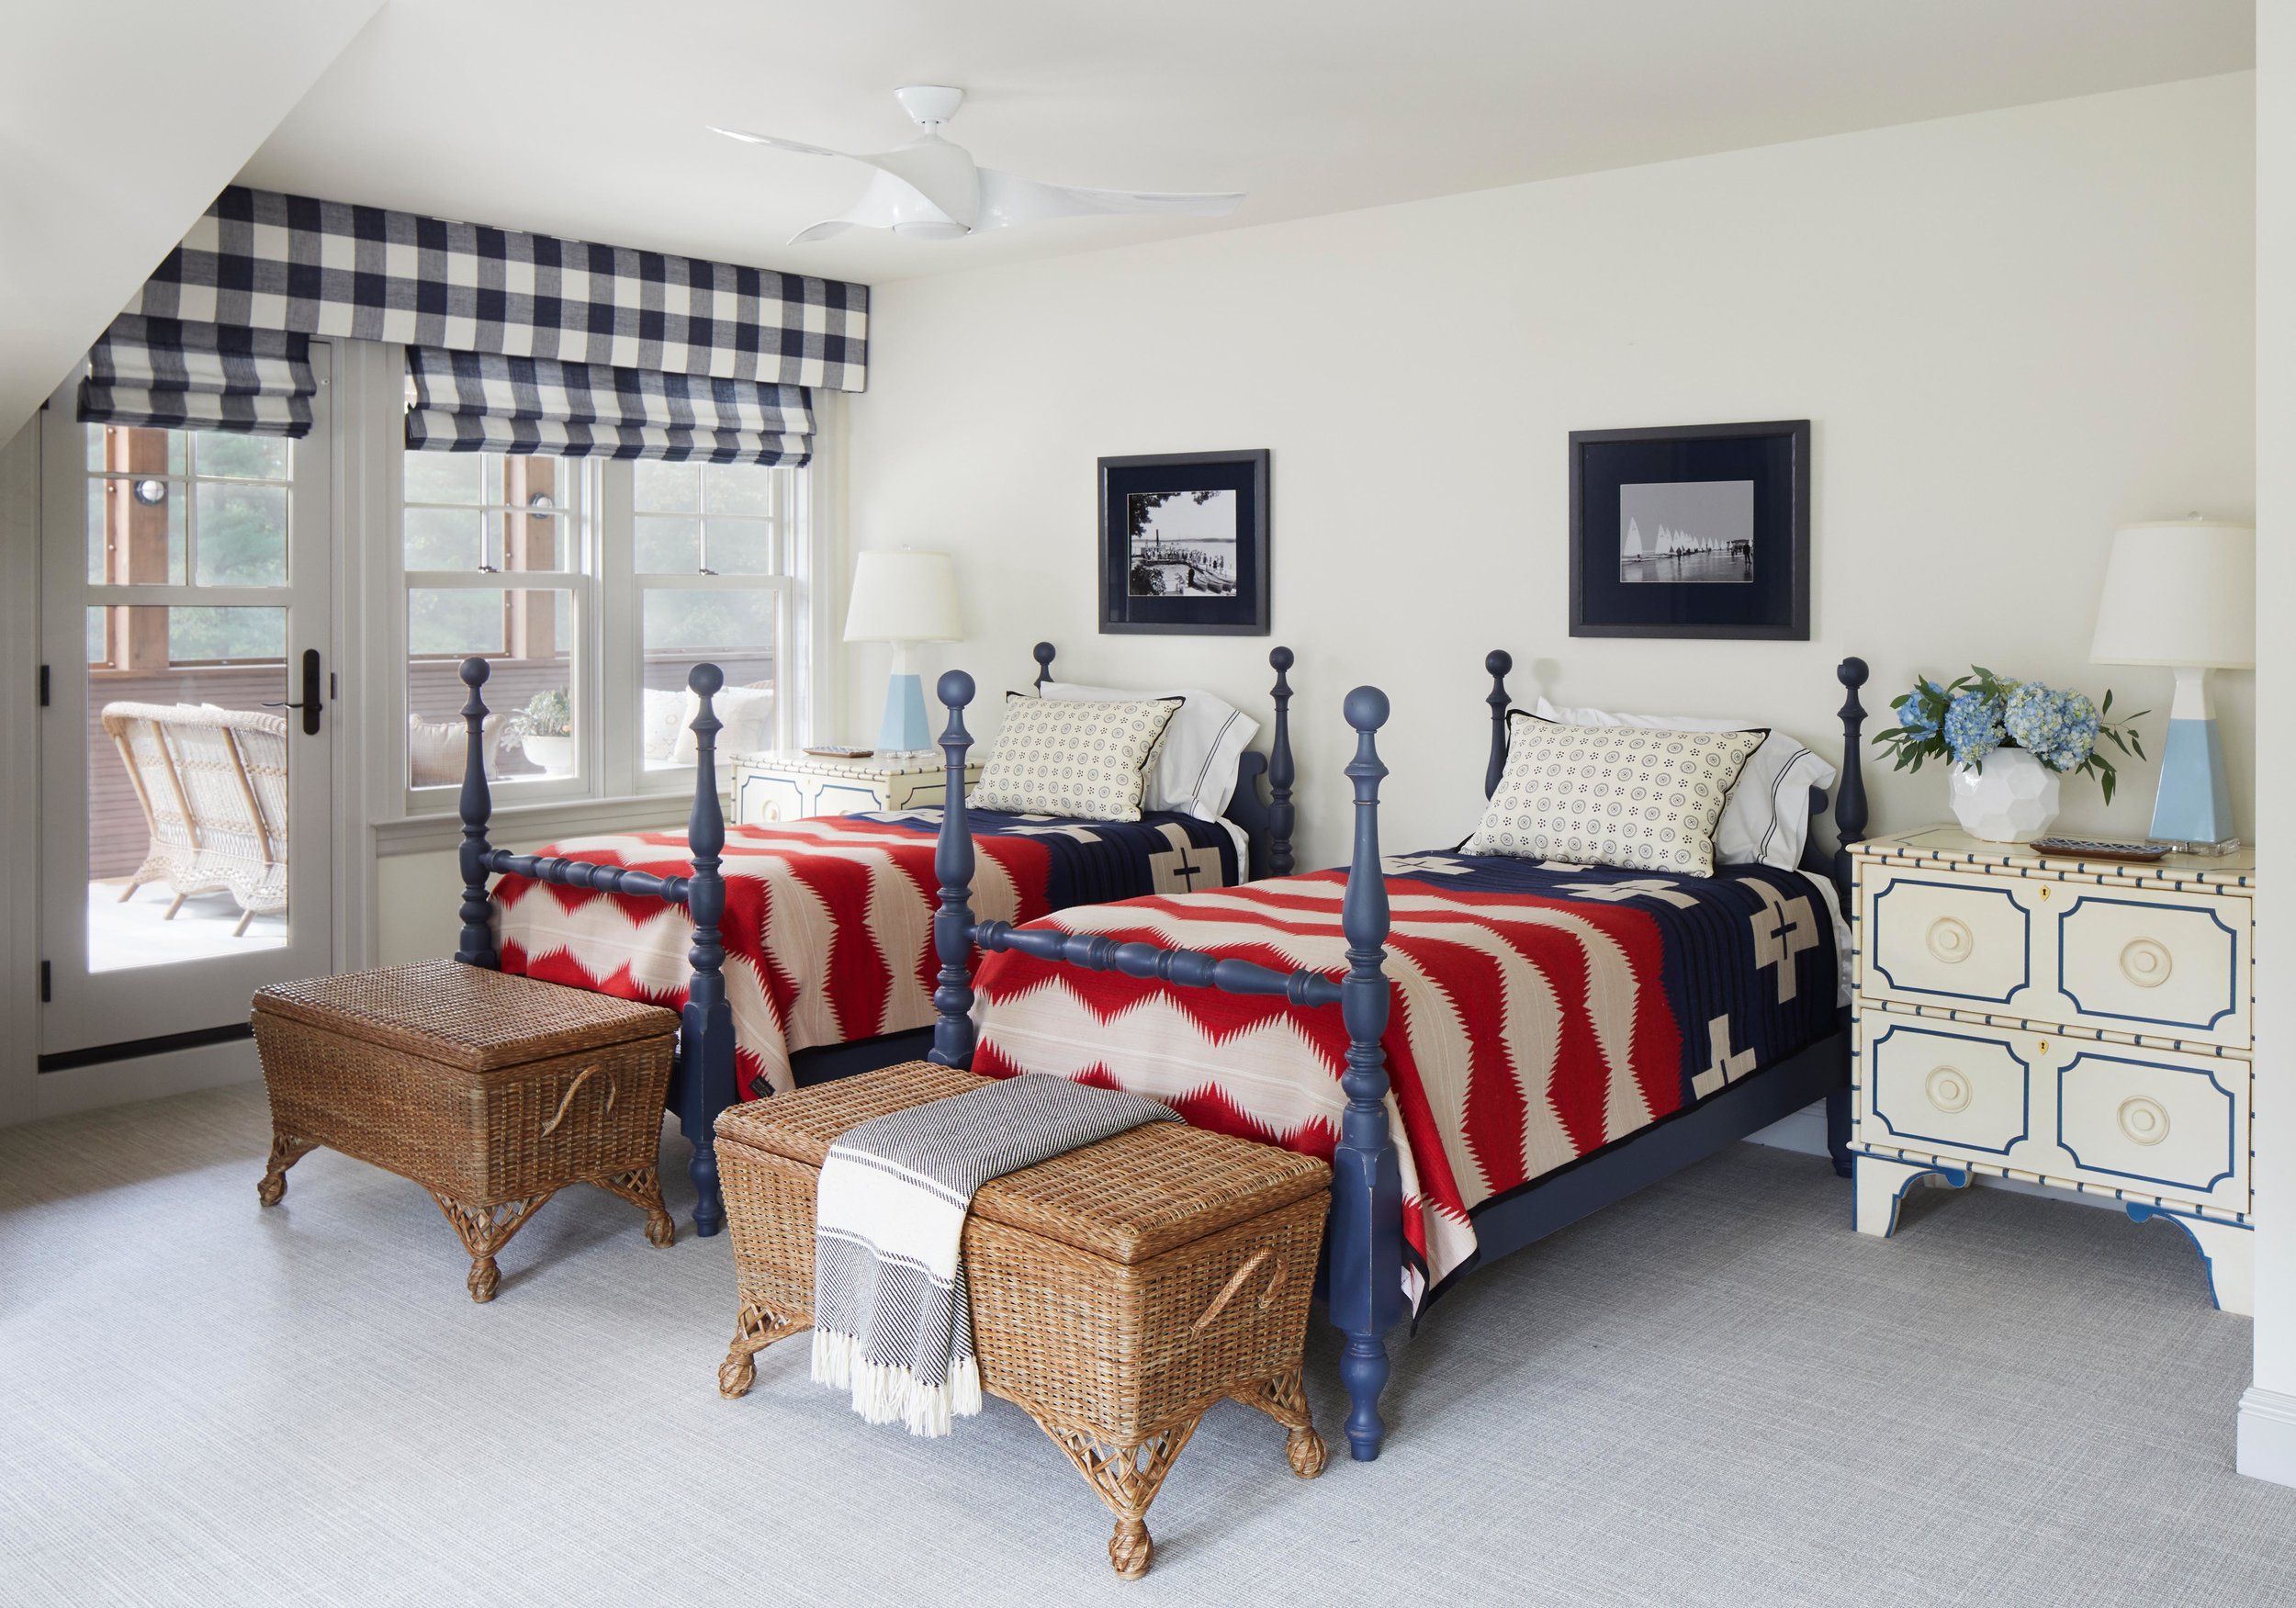 Classic red, white, and blue bedroom. Come see more interior design inspiration from Elizabeth Drake. Photo by Werner Straube. #interiordesign #classicdesign #traditionaldecor #housetour #elizabethdrake